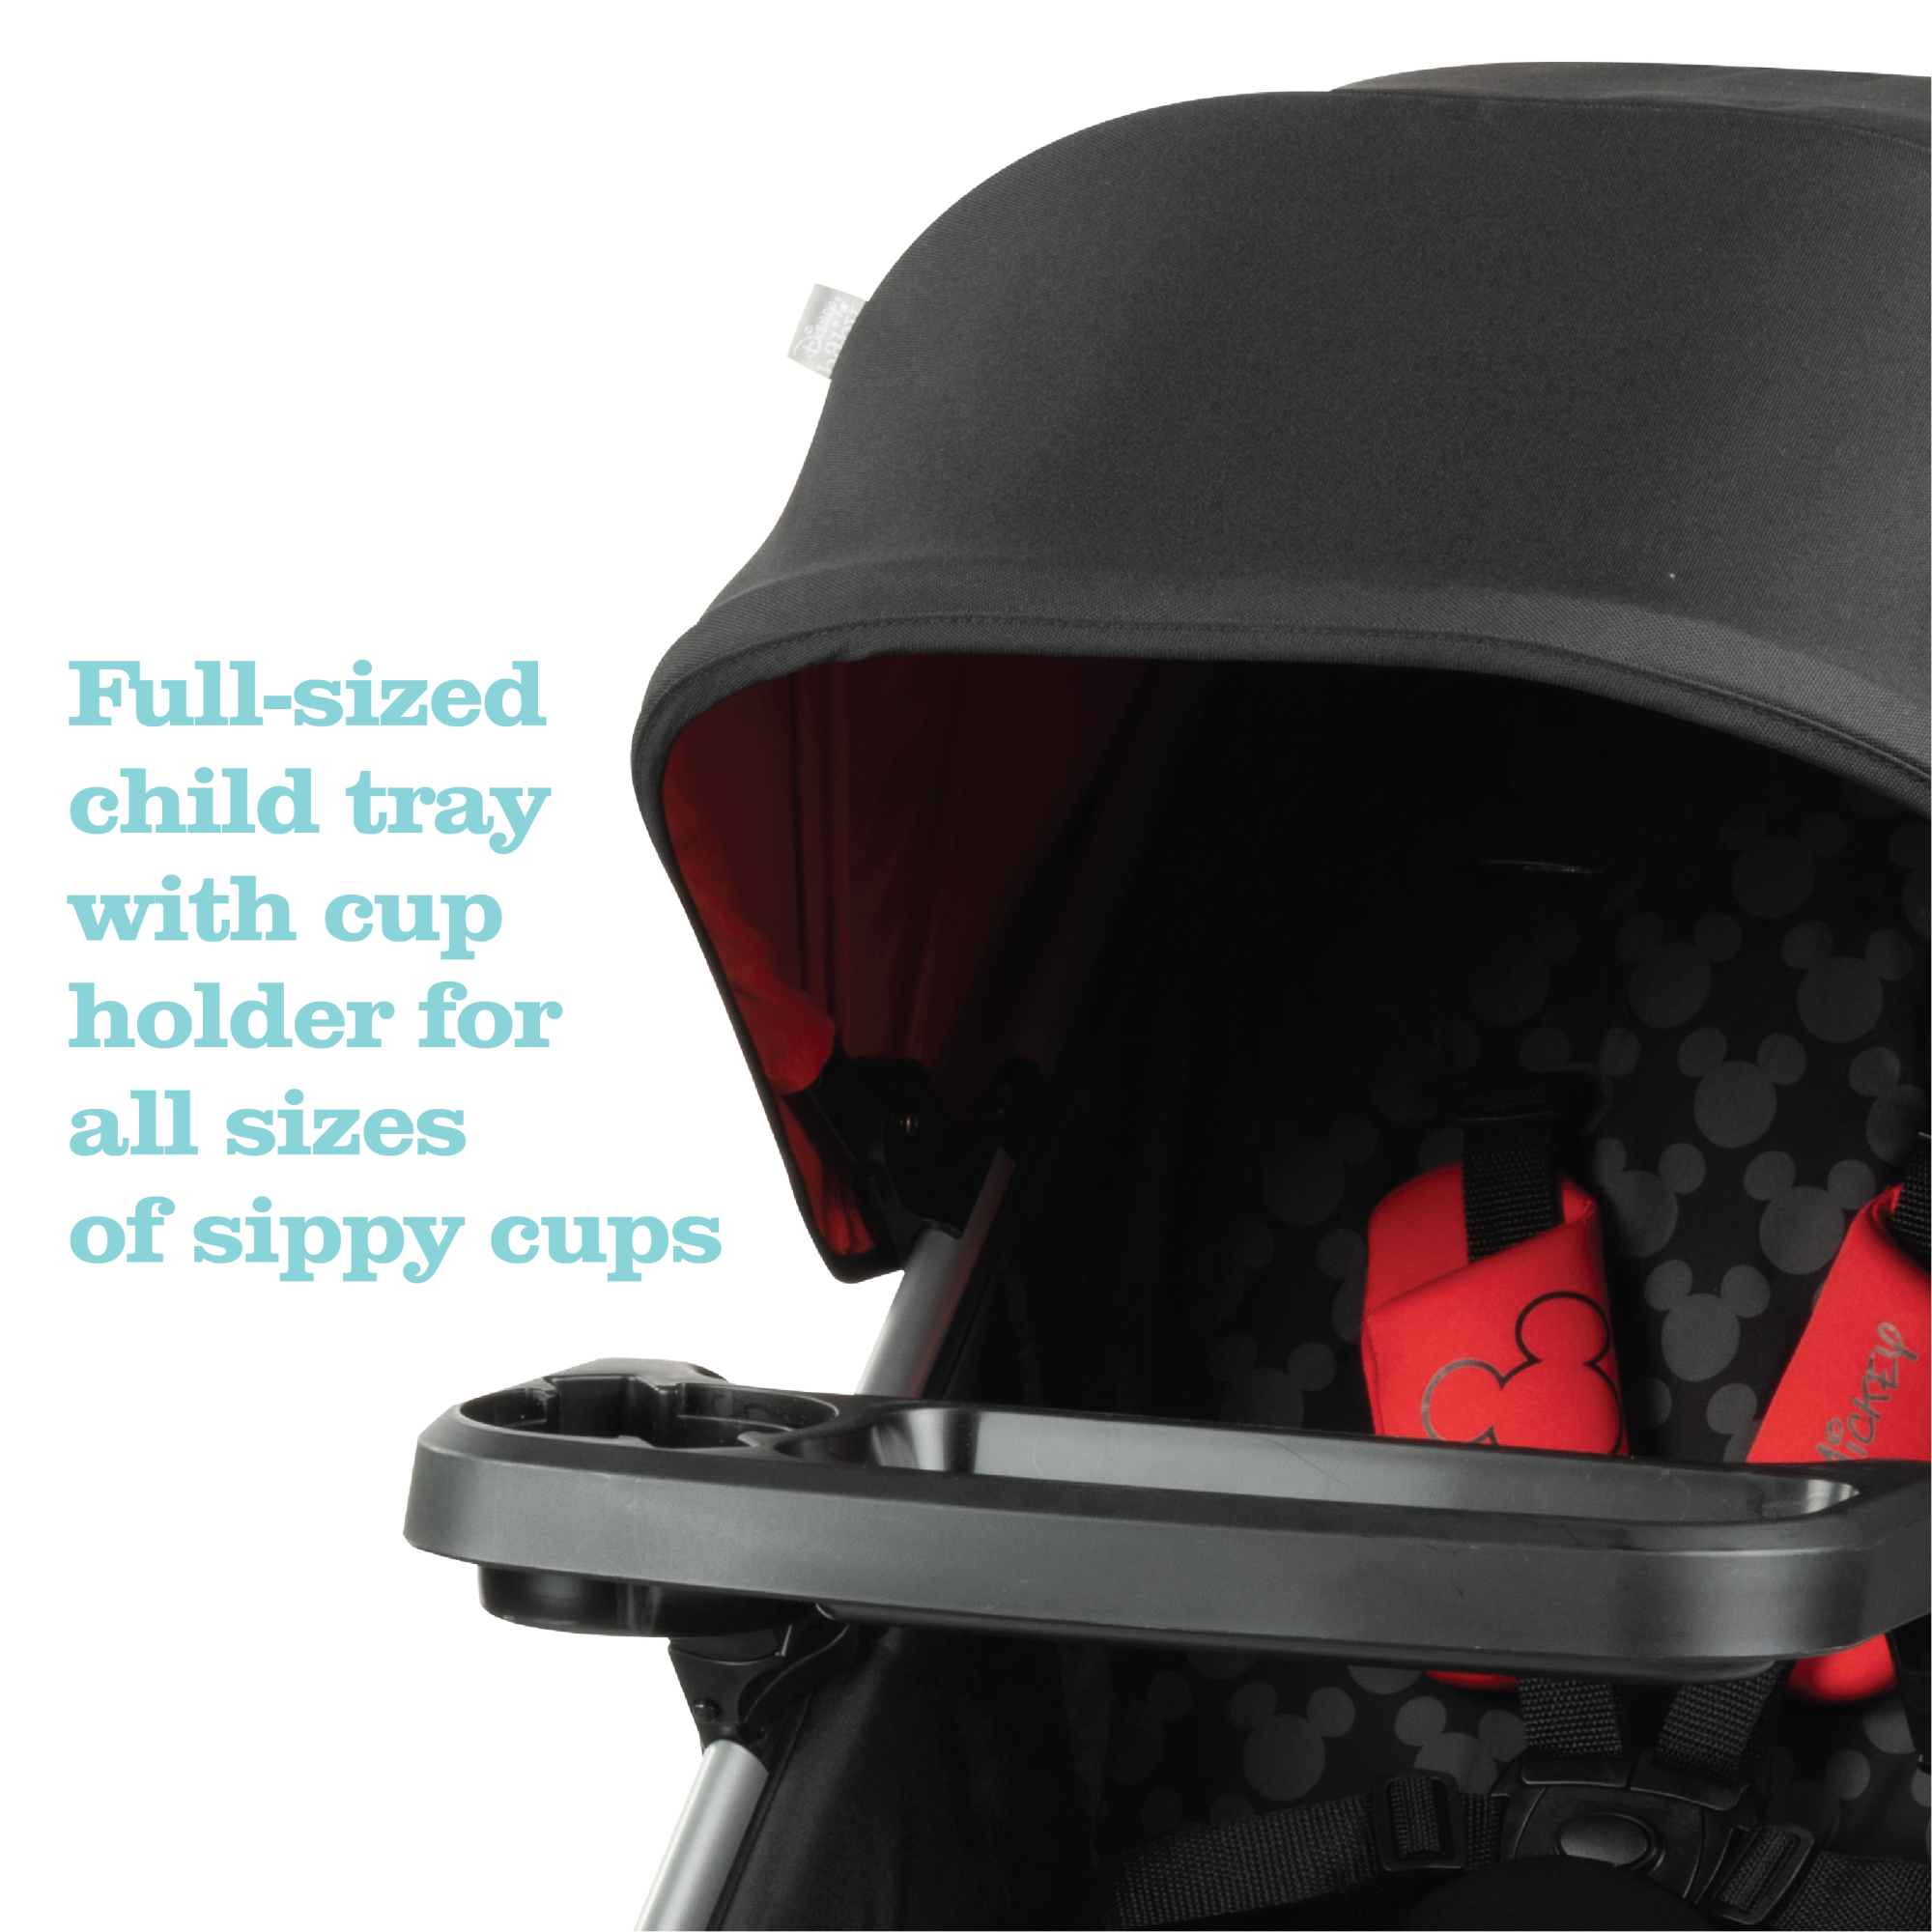 Disney Baby Grow and Go™ Modular Travel System - full-sized child tray with cup holder for all sizes of sippy cups